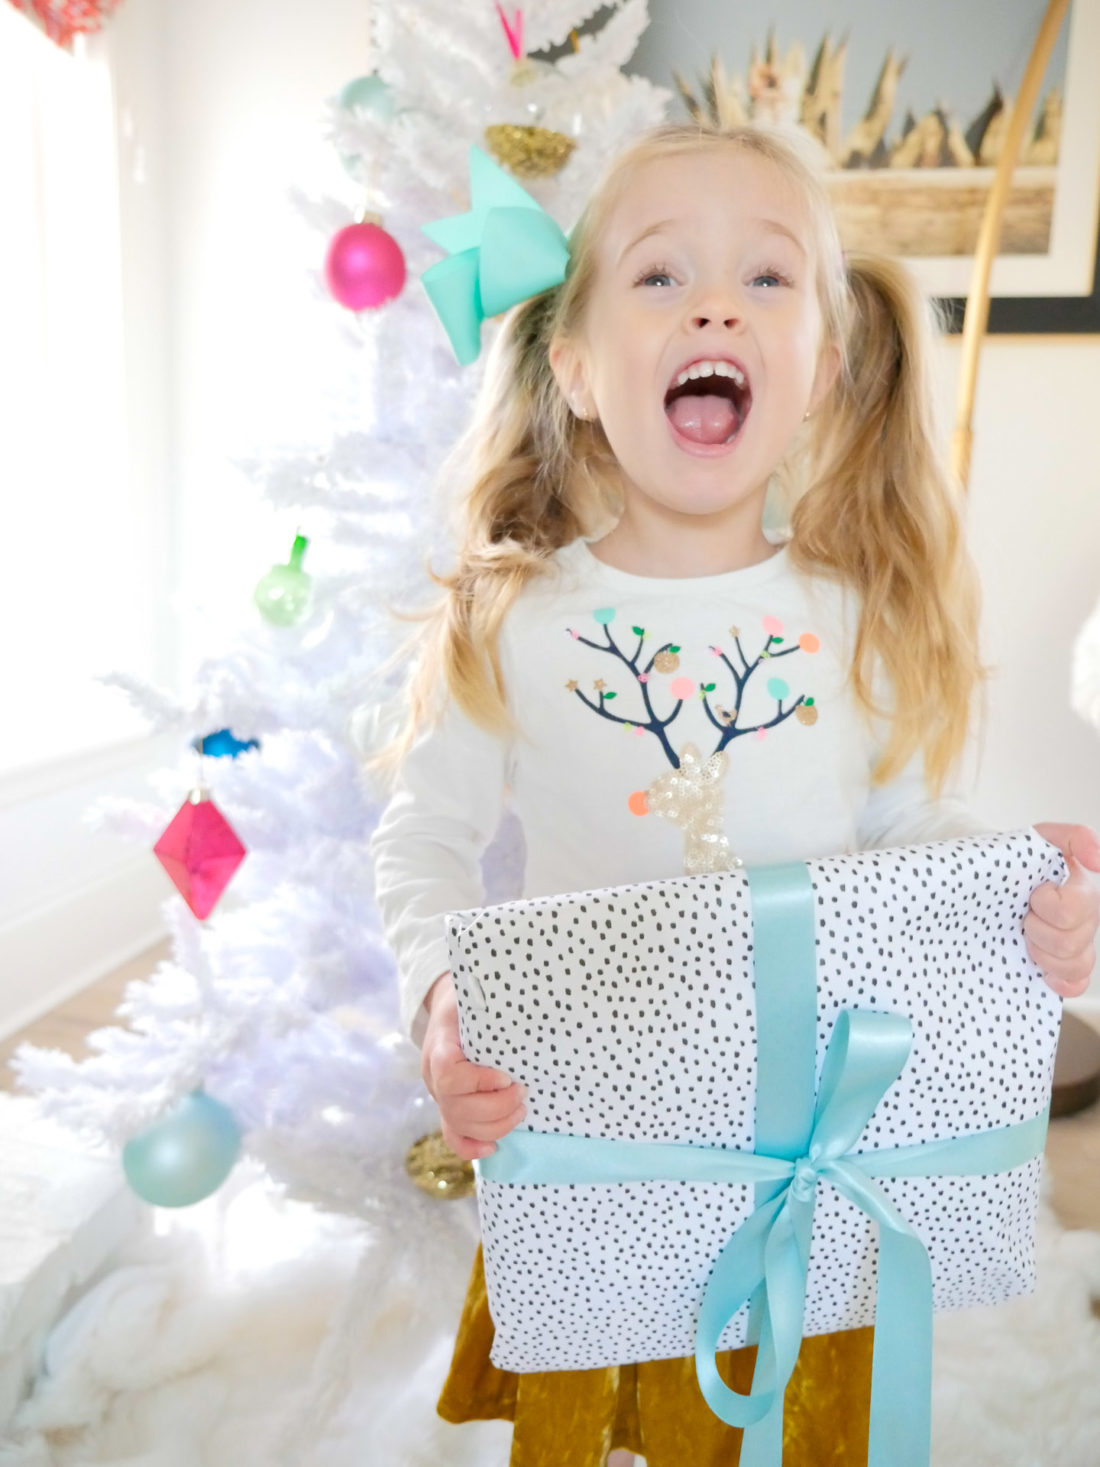 Marlowe Martino shrieks with joy as she holds a colorful christmas present in front of the white and pastel christmas tree in her Connecticut home